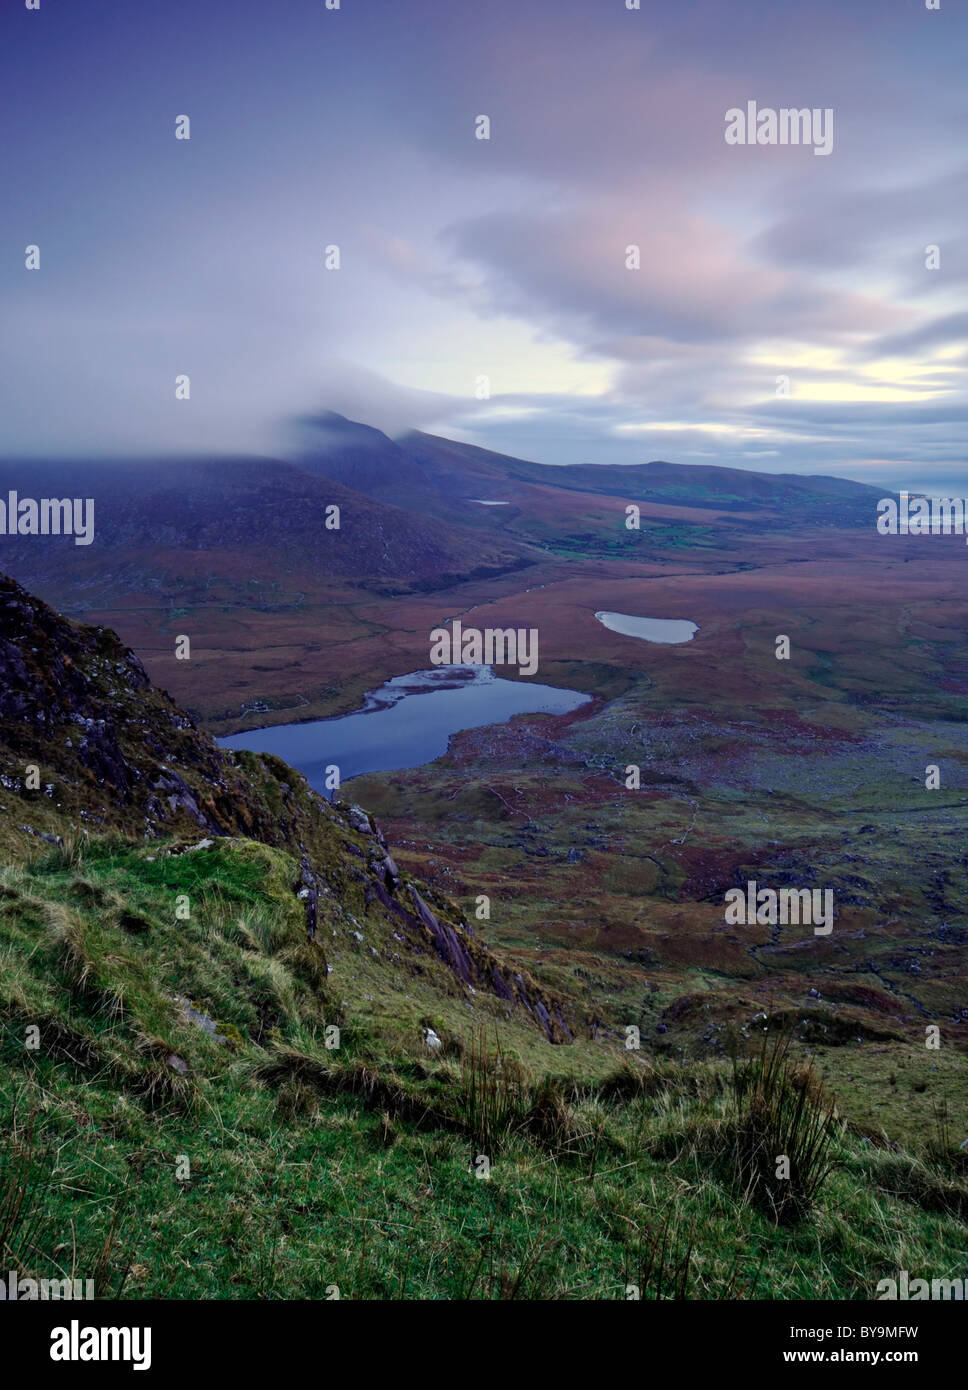 Soft light over the brandon mountains along the Conor pass near Dingle County Kerry Ireland scenic scene viewpoint Stock Photo